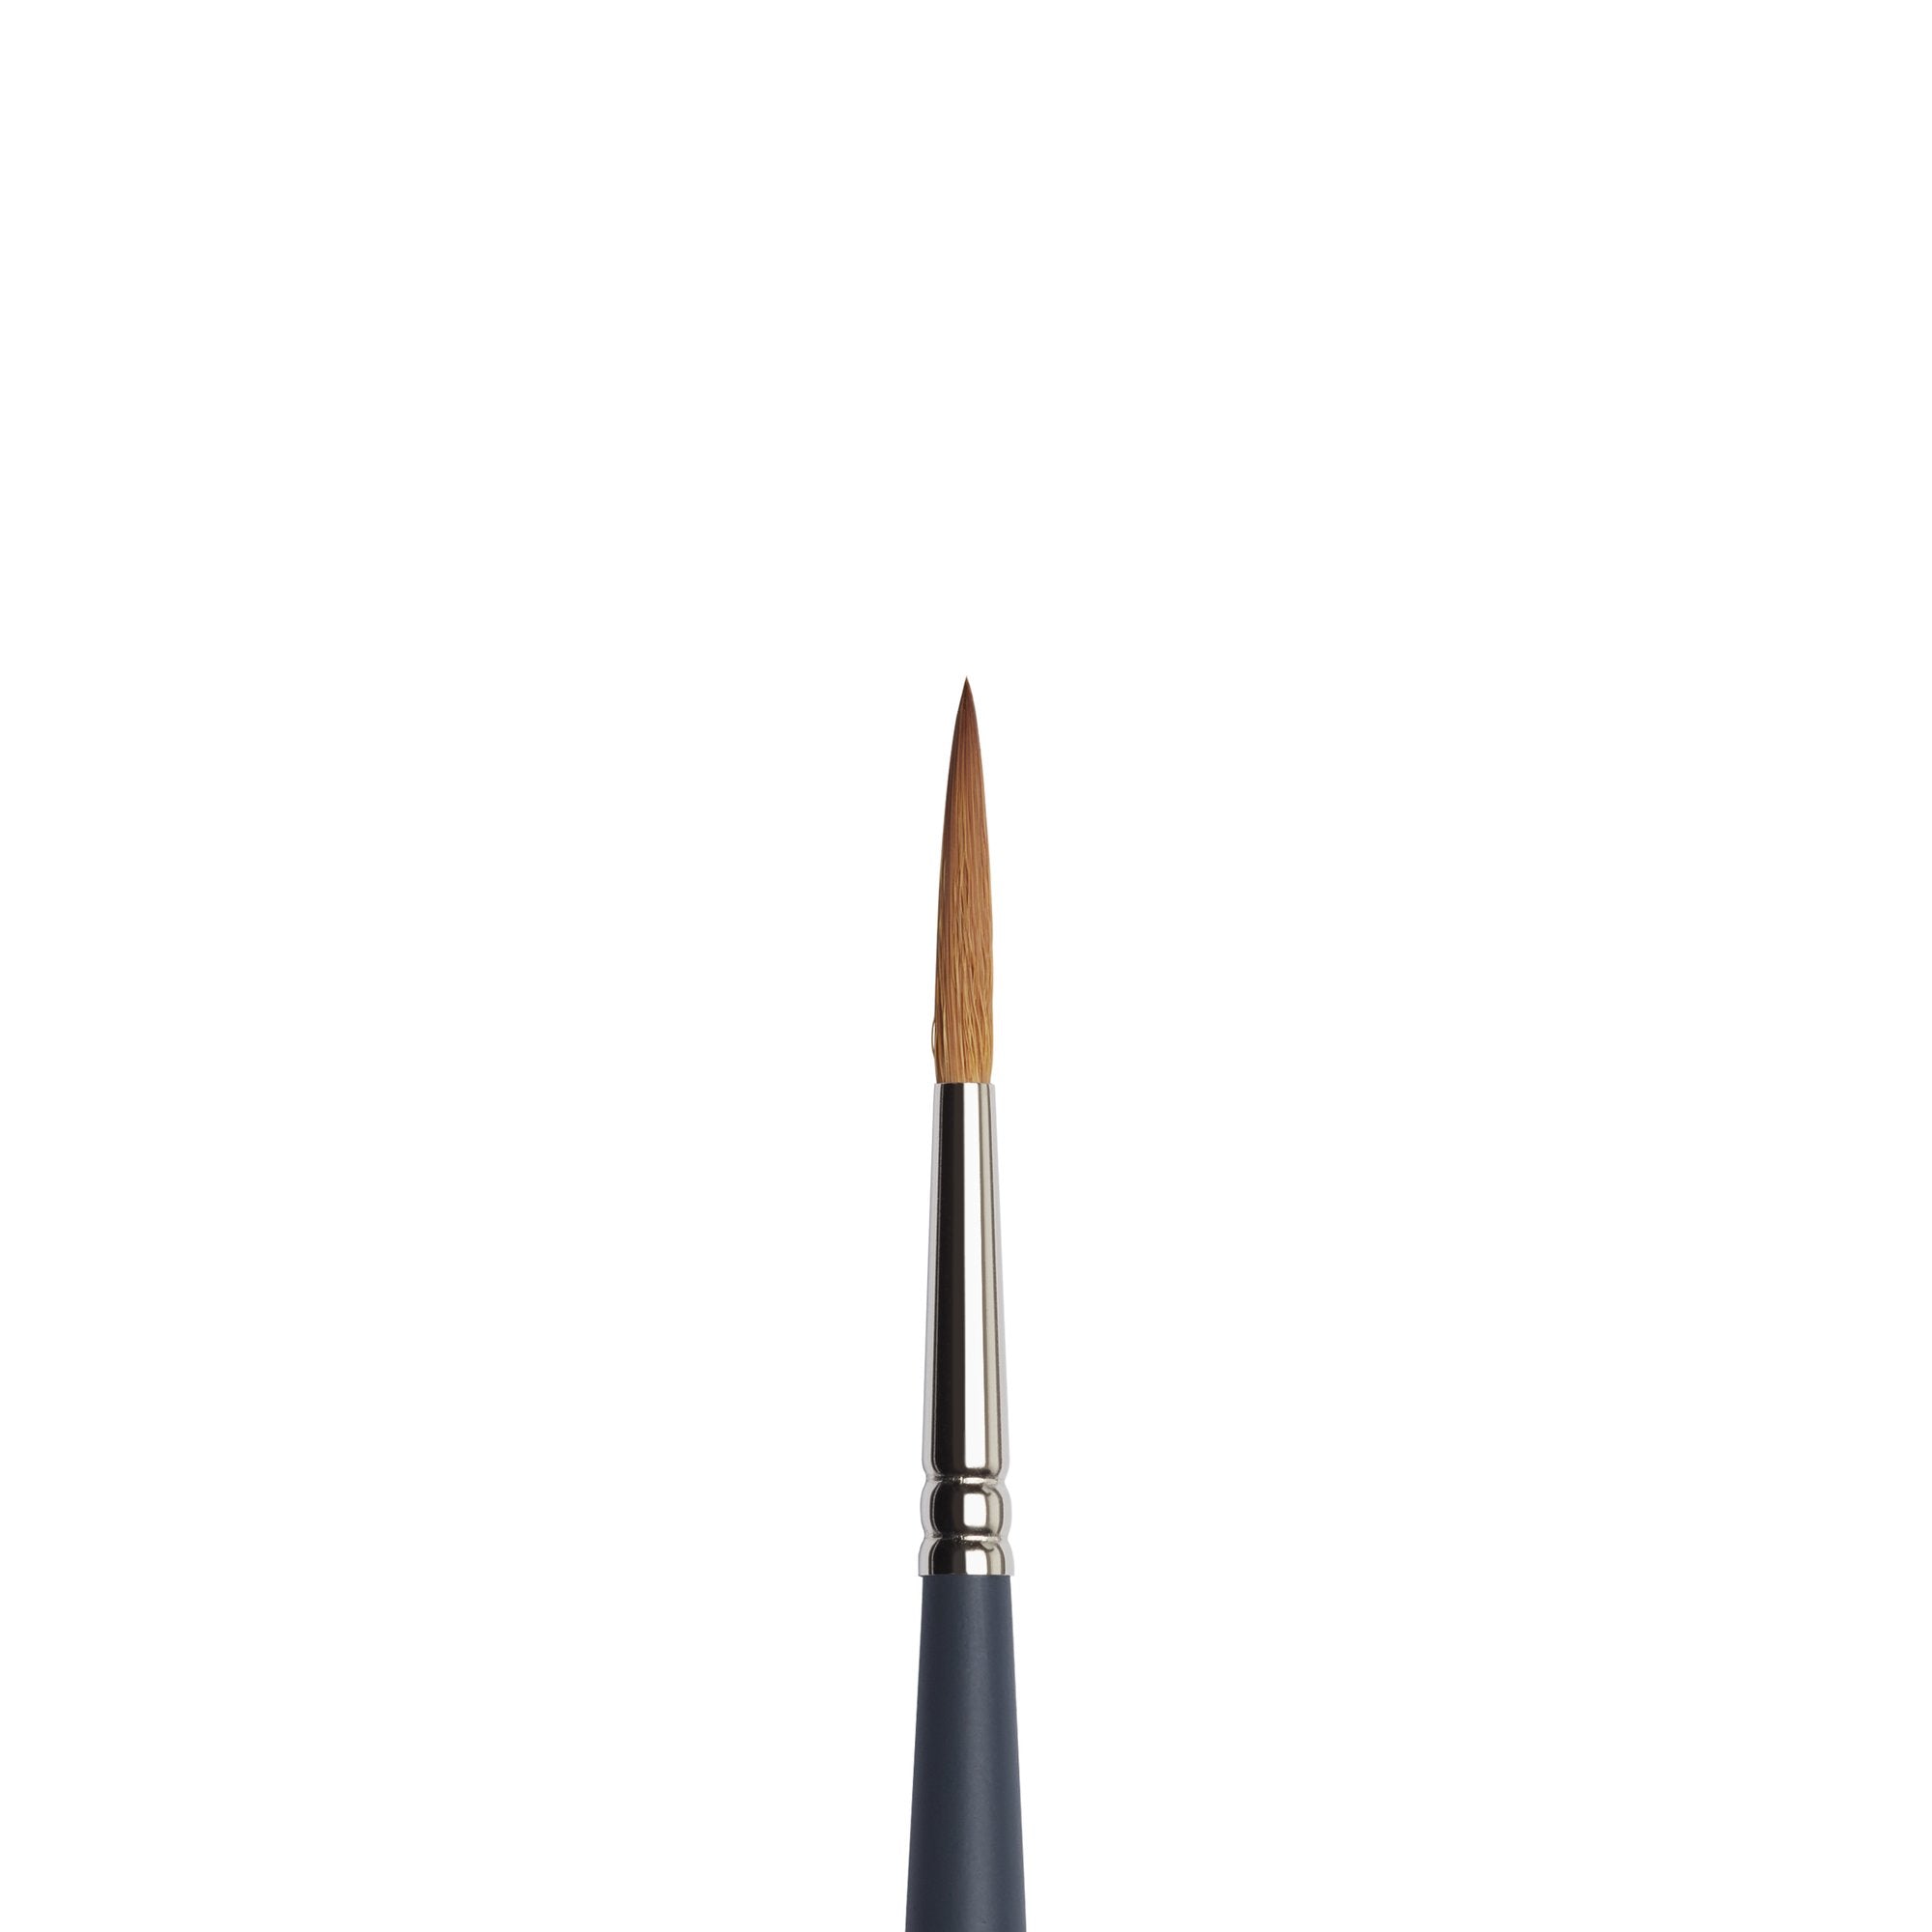 Winsor & Newton Professional Watercolour Synthetic Sable Brush Rigger 6